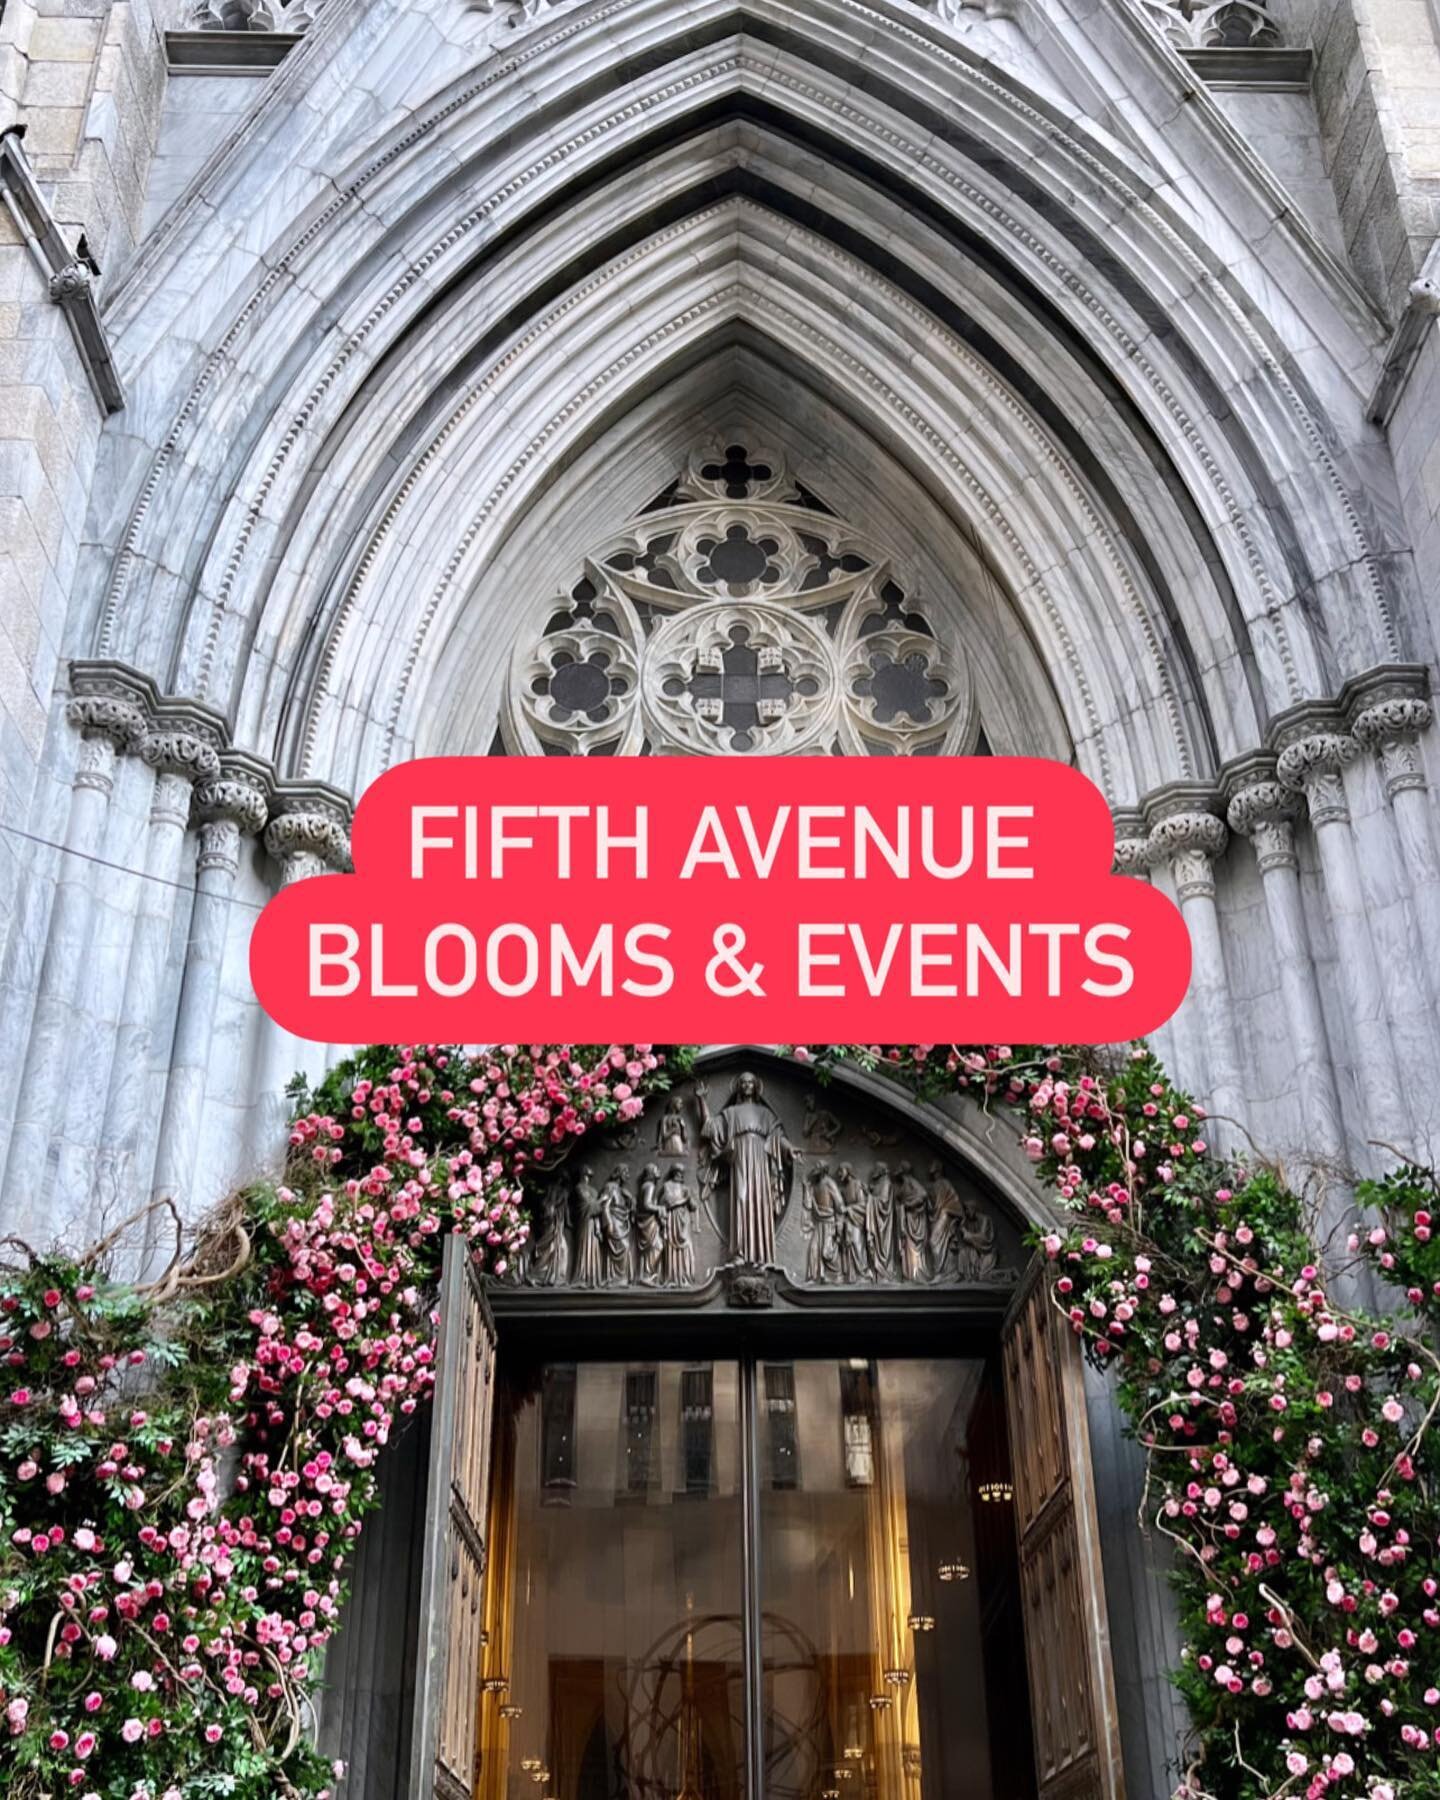 🌷NYC MUST SEE ASAP 🌷 @vancleefarpels is hosting these free floral blooms installations on 5th Ave (50th-59th St) until 5/31!
Also recommend:
🌷 On 51st &amp; Fifth, see the famous St Patrick&rsquo;s Cathedral entrance decorated with florals 🌸🌸
🌷